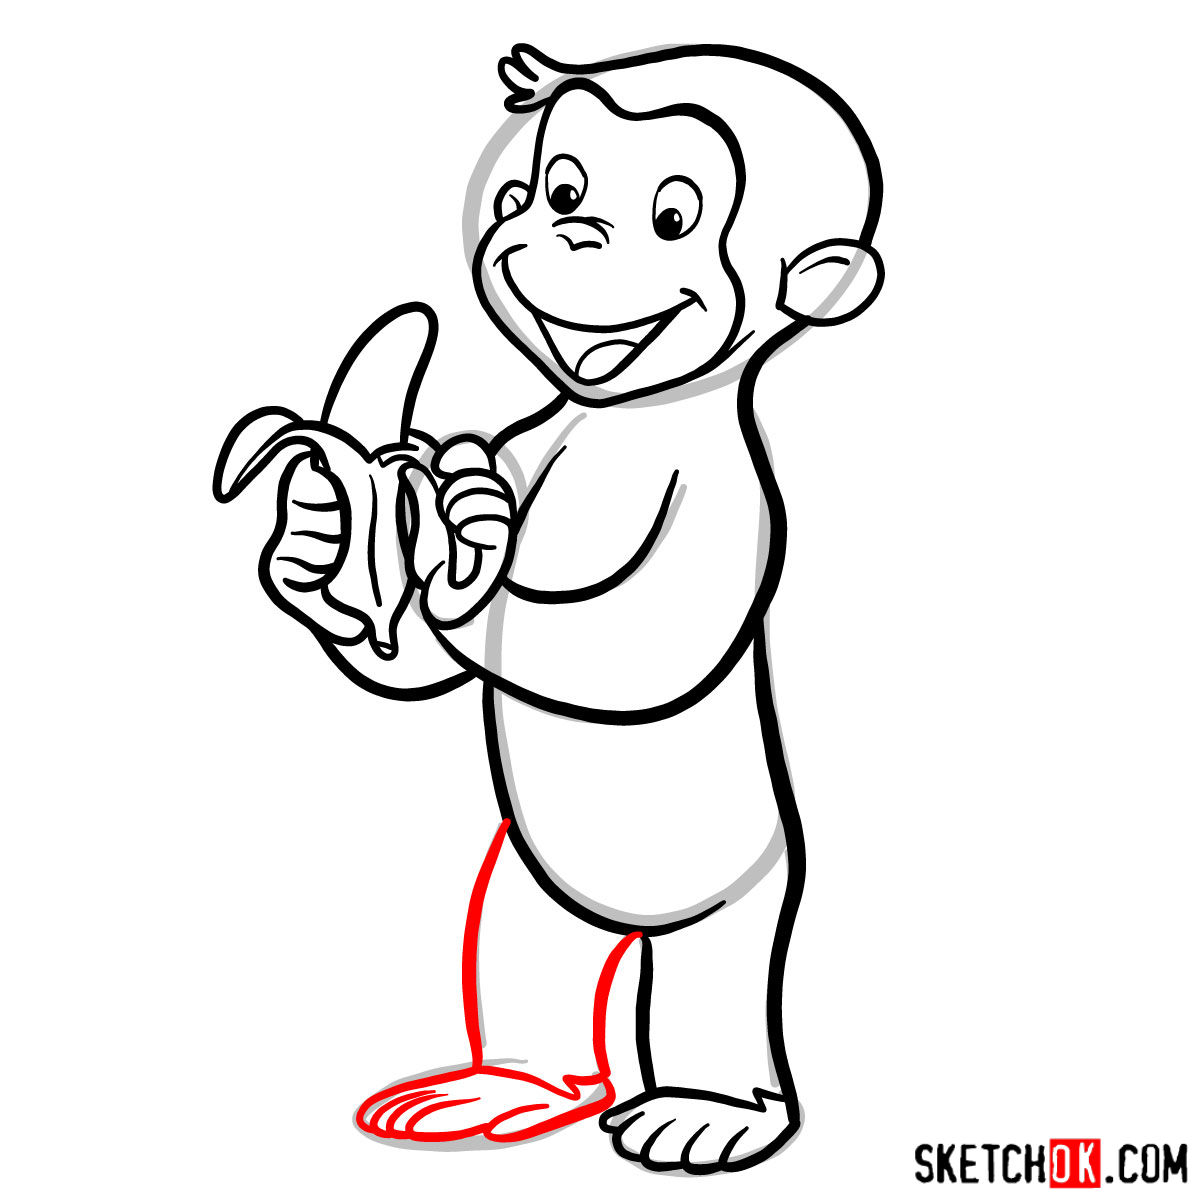 How to draw Curious George - step 08